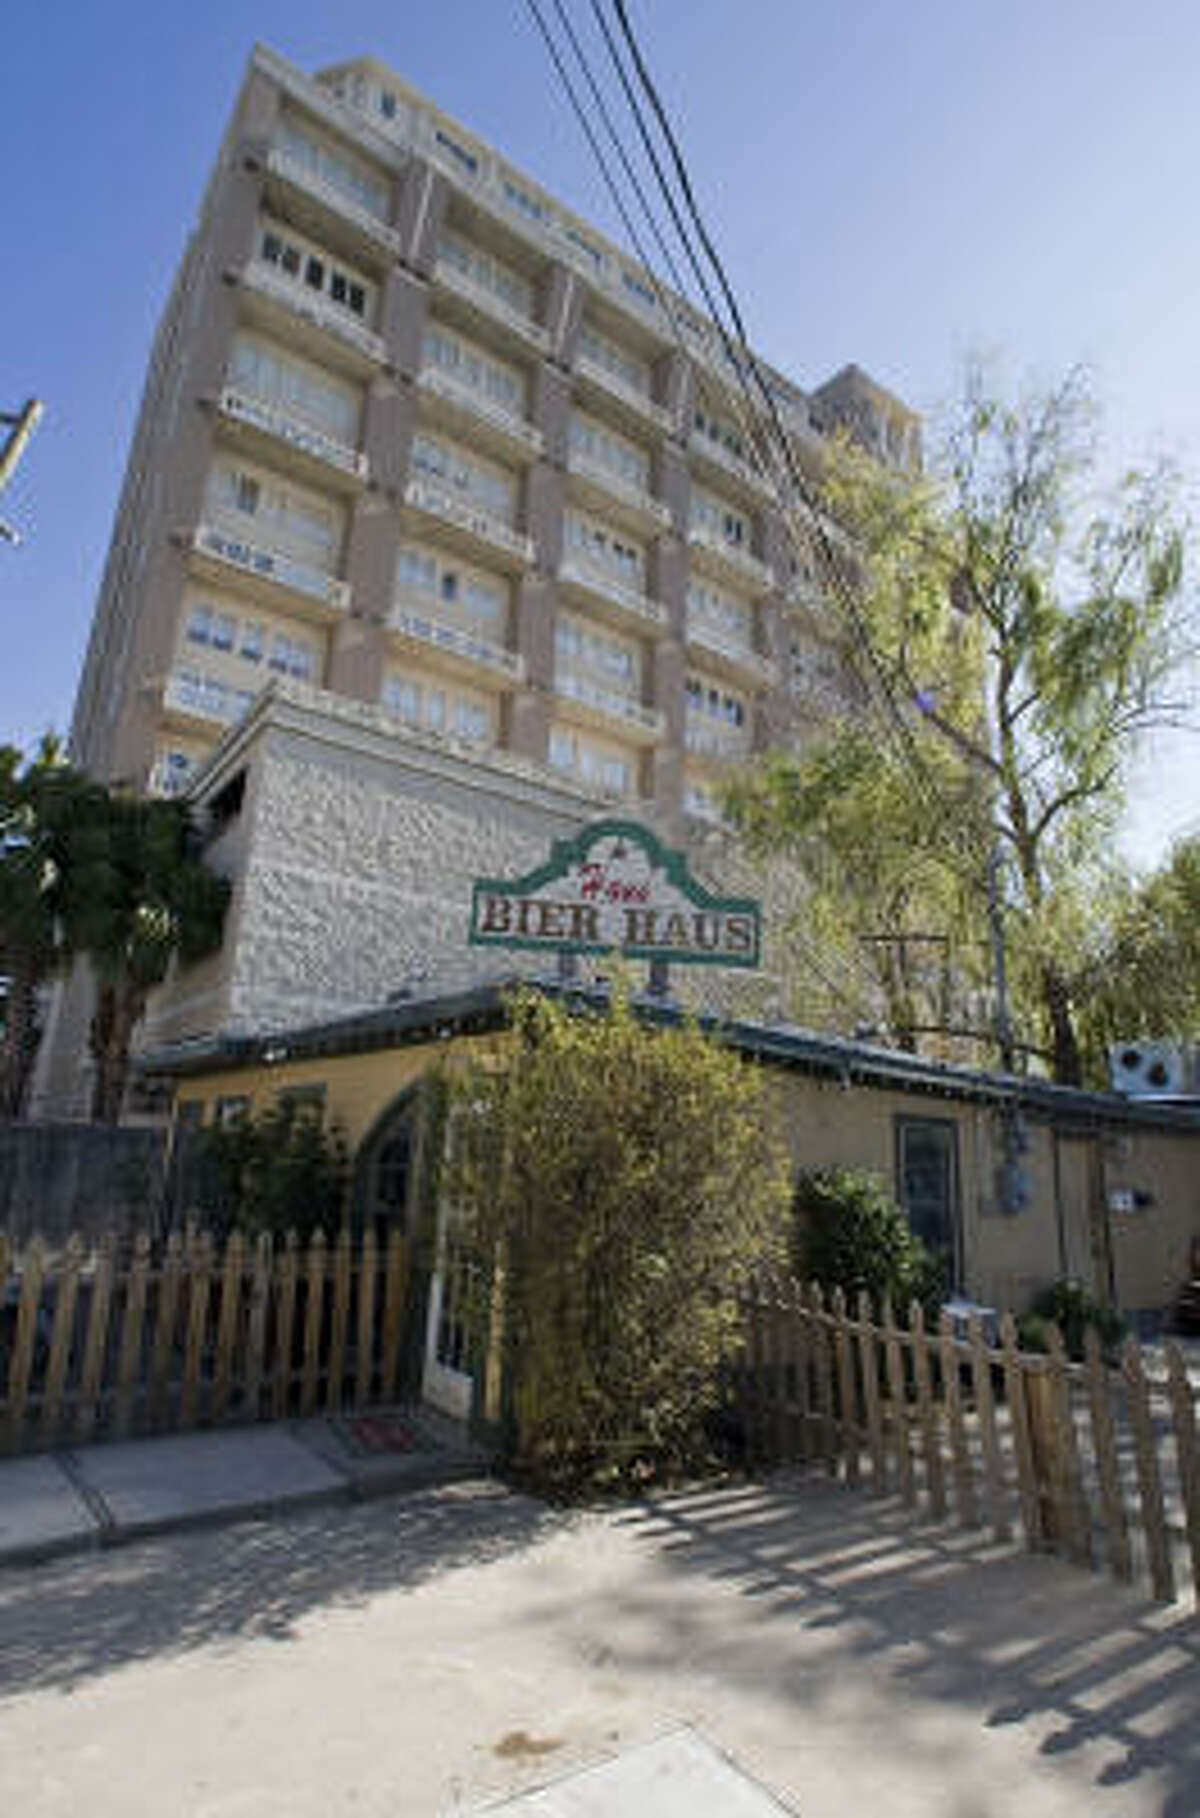 Hans' Bier Haus near Rice Village is situated next door to high rise condominiums with an attached garage on Robinhood Drive.